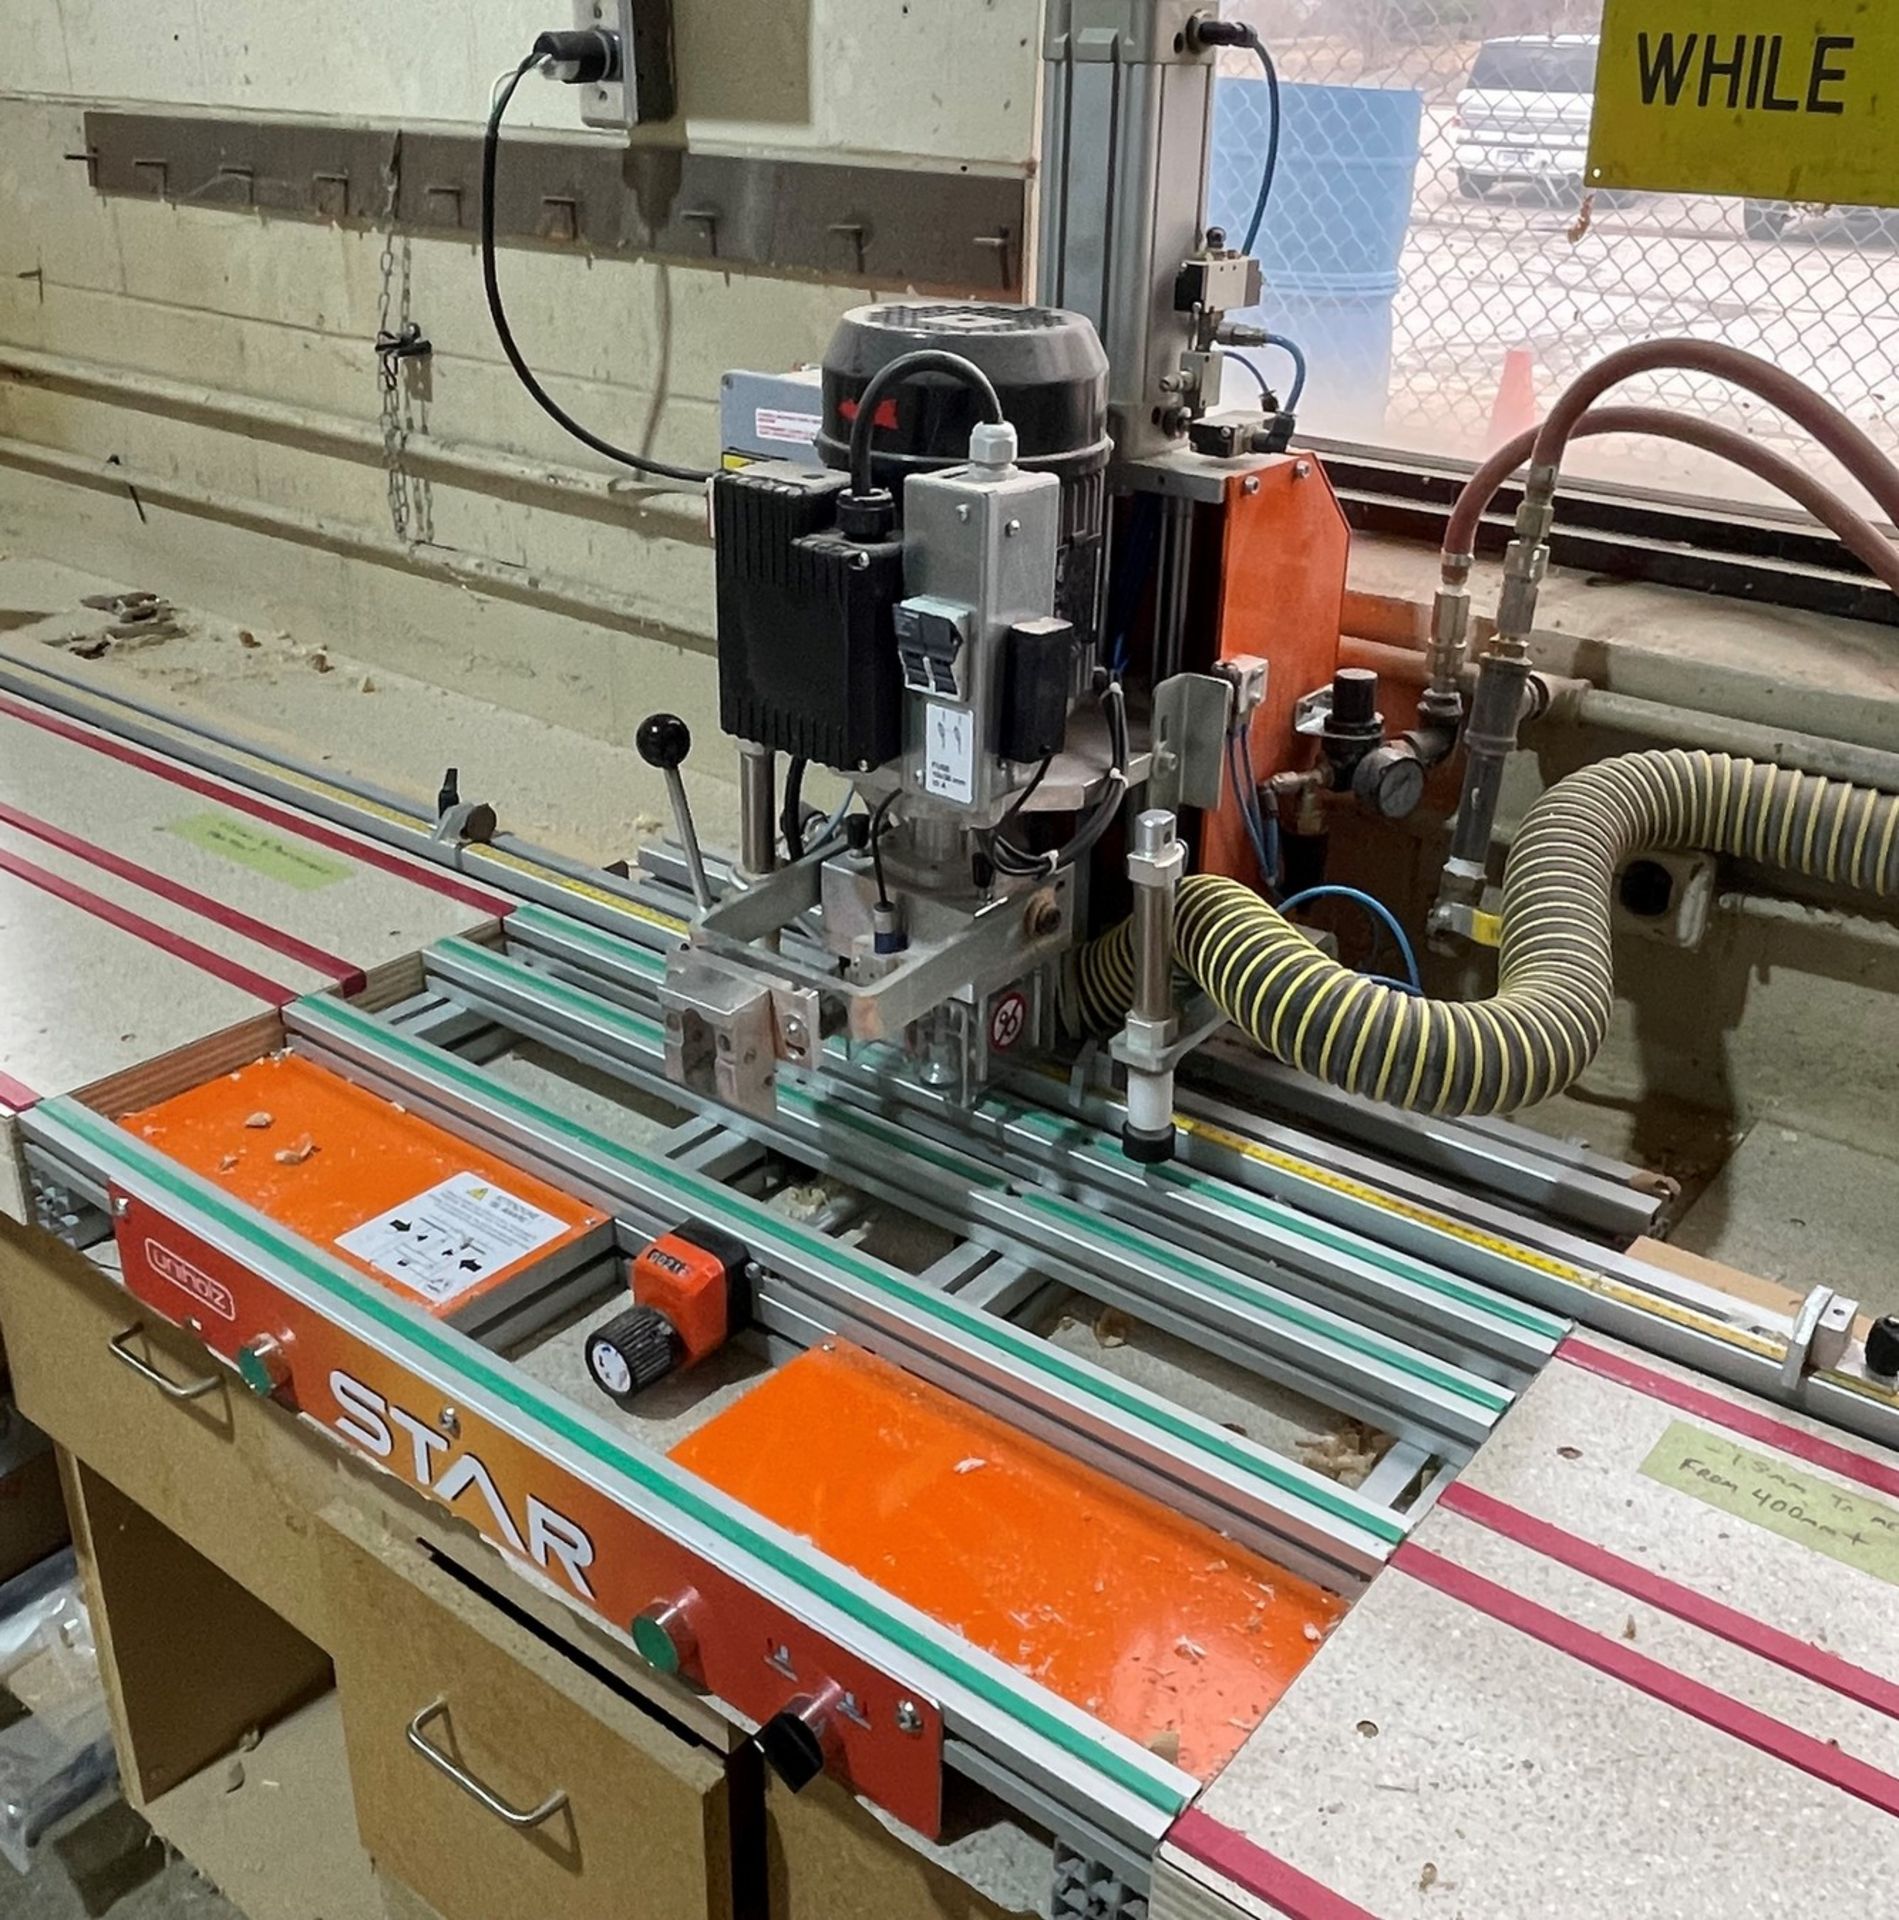 UNIHOLZ STAR HINGE BORING MACHINE, S/N UN 5543 W/ TABLE, CABINET, DRAWERS, HARDWARE, ETC. (RIGGING - Image 4 of 5